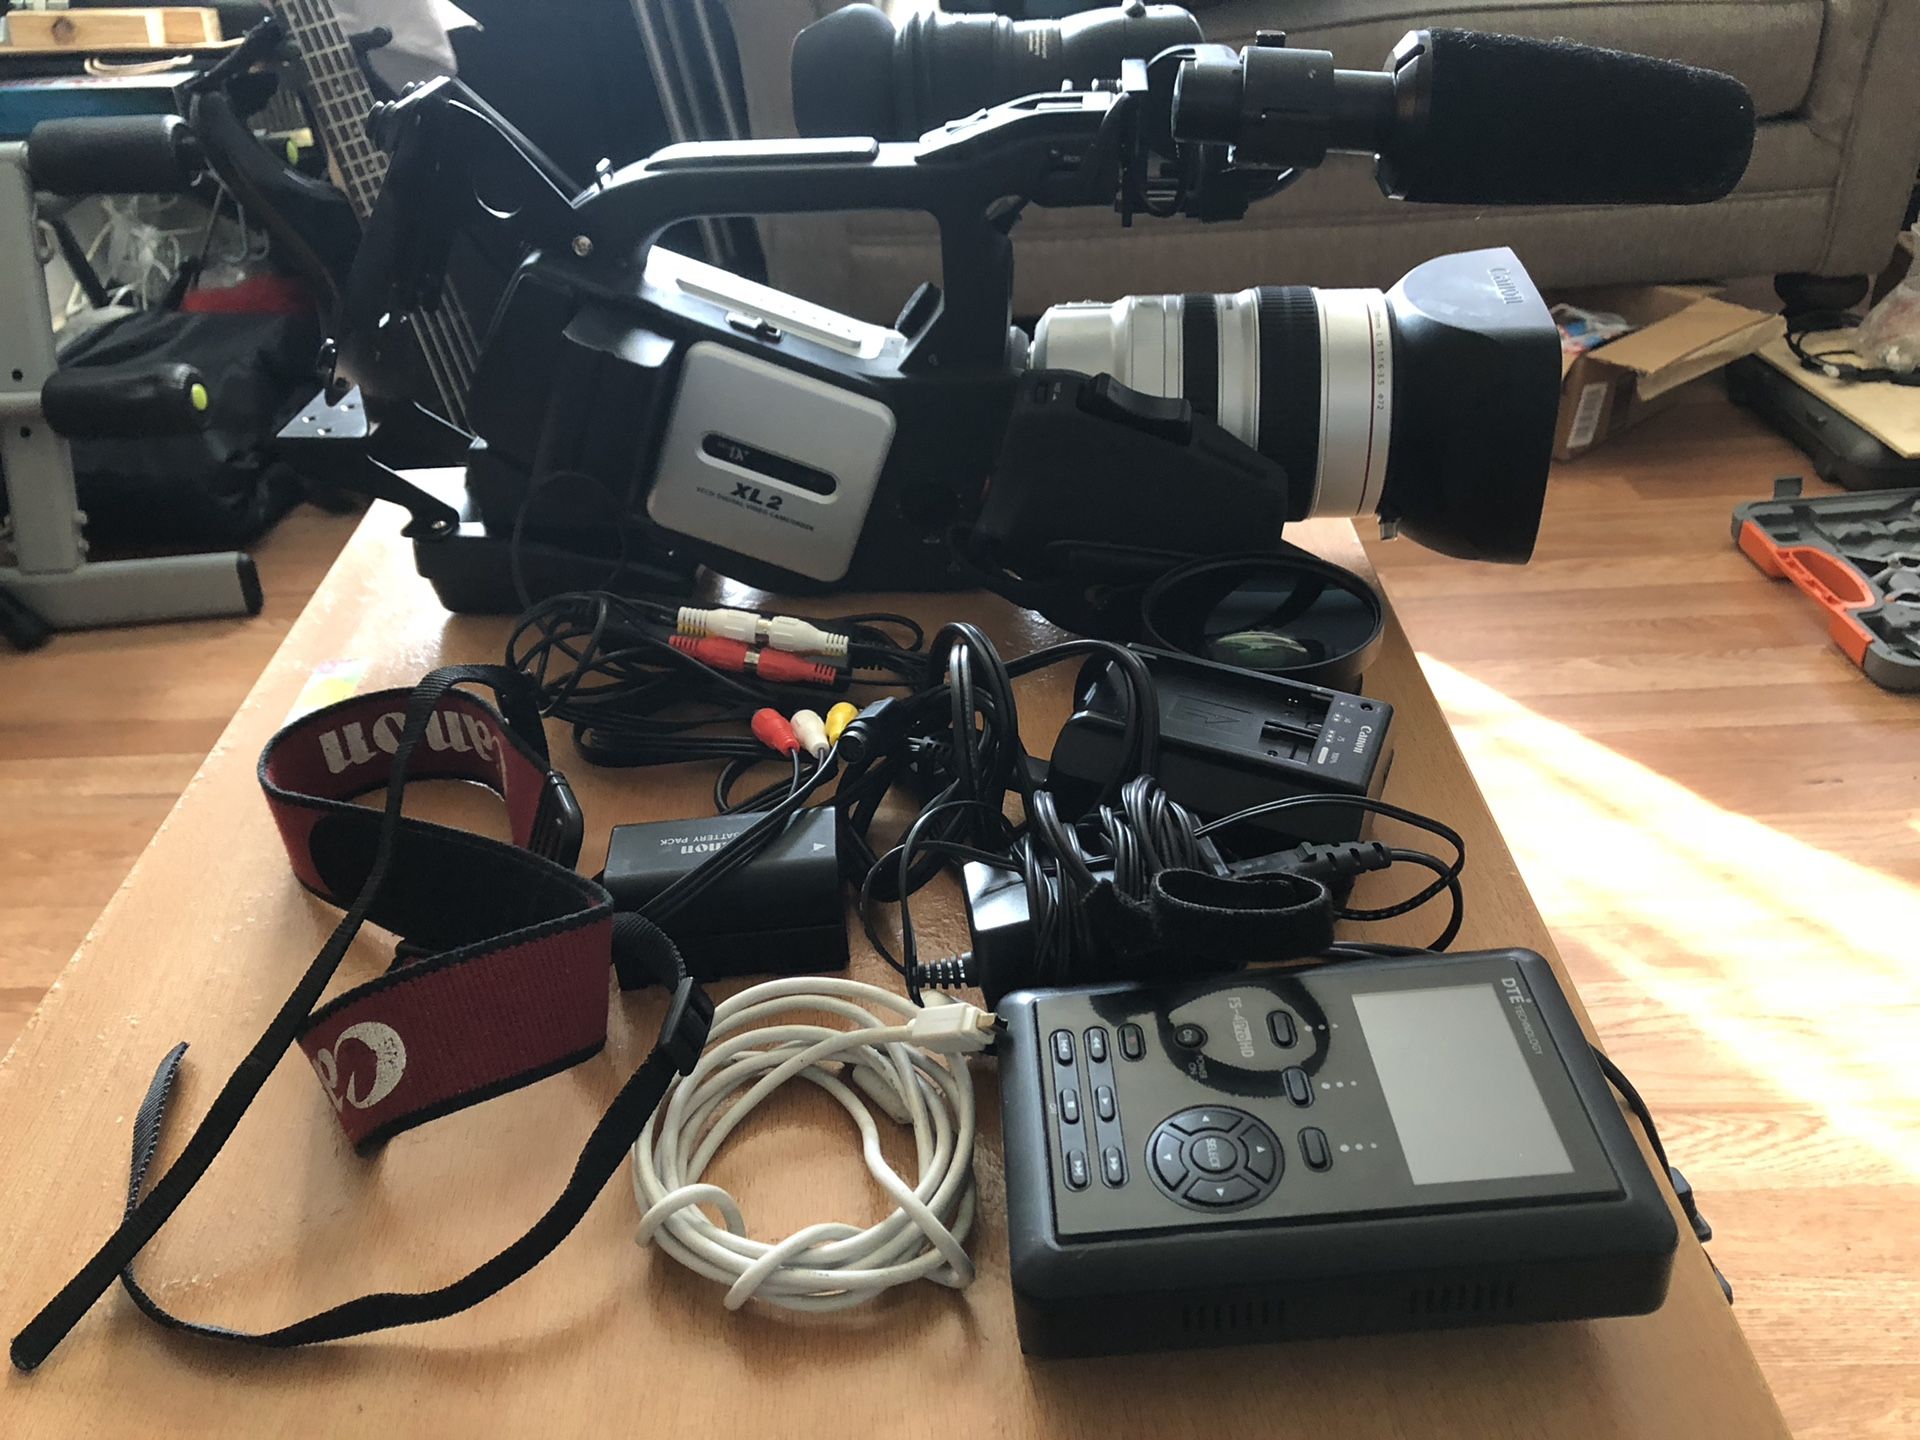 Canon XL2 Camcorder with digital recorder